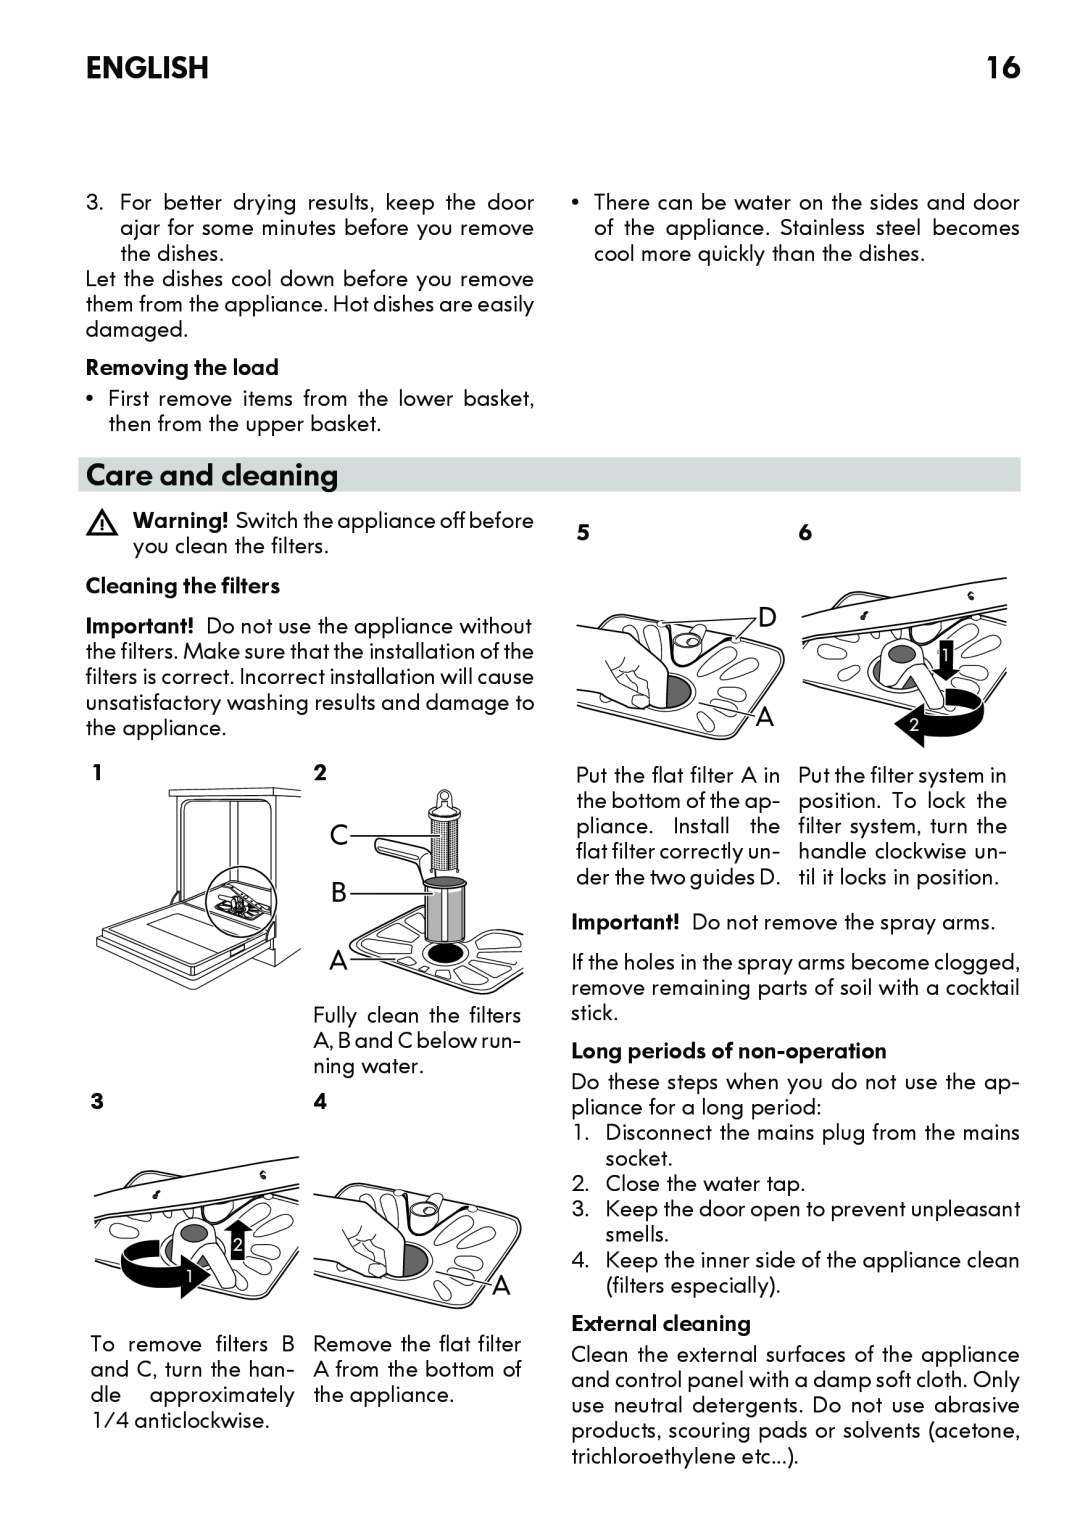 IKEA DW60 manual Care and cleaning, C B A, English, Removing the load 